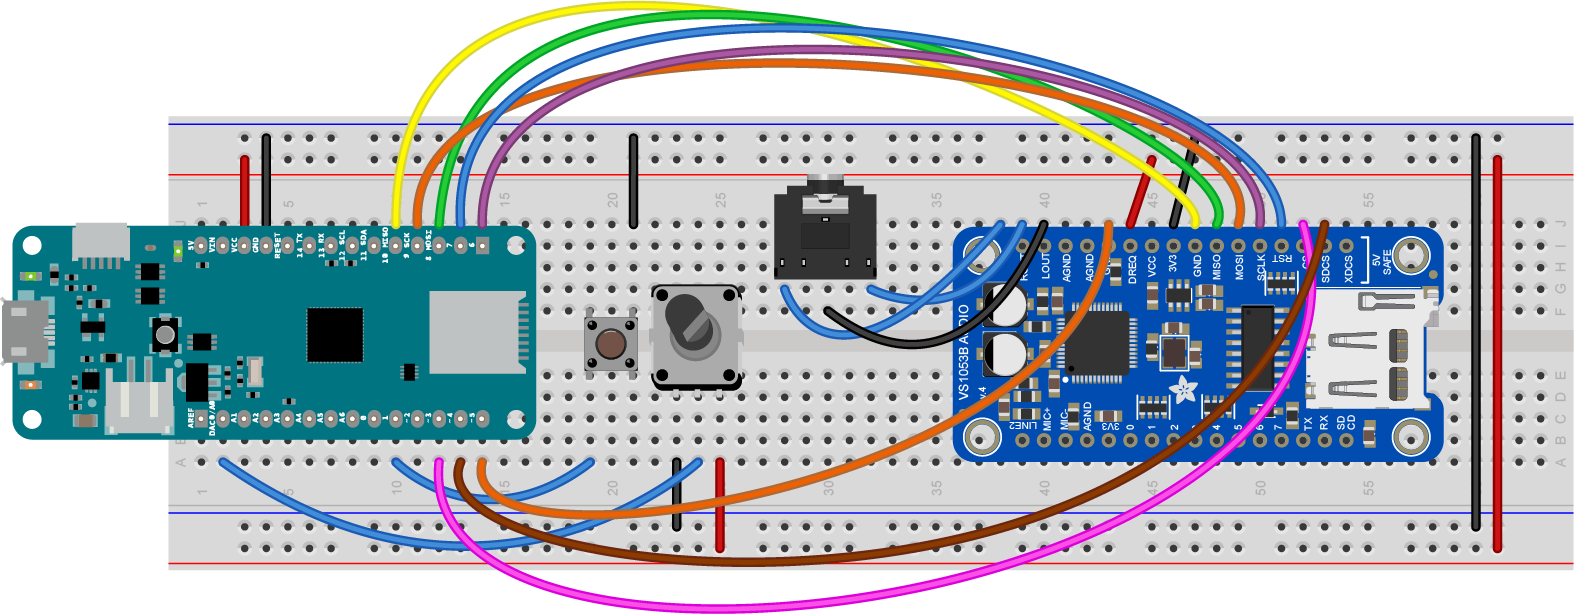 Figure 1. MKR board connected to an Adafruit VS1053 module as an MP3 player.